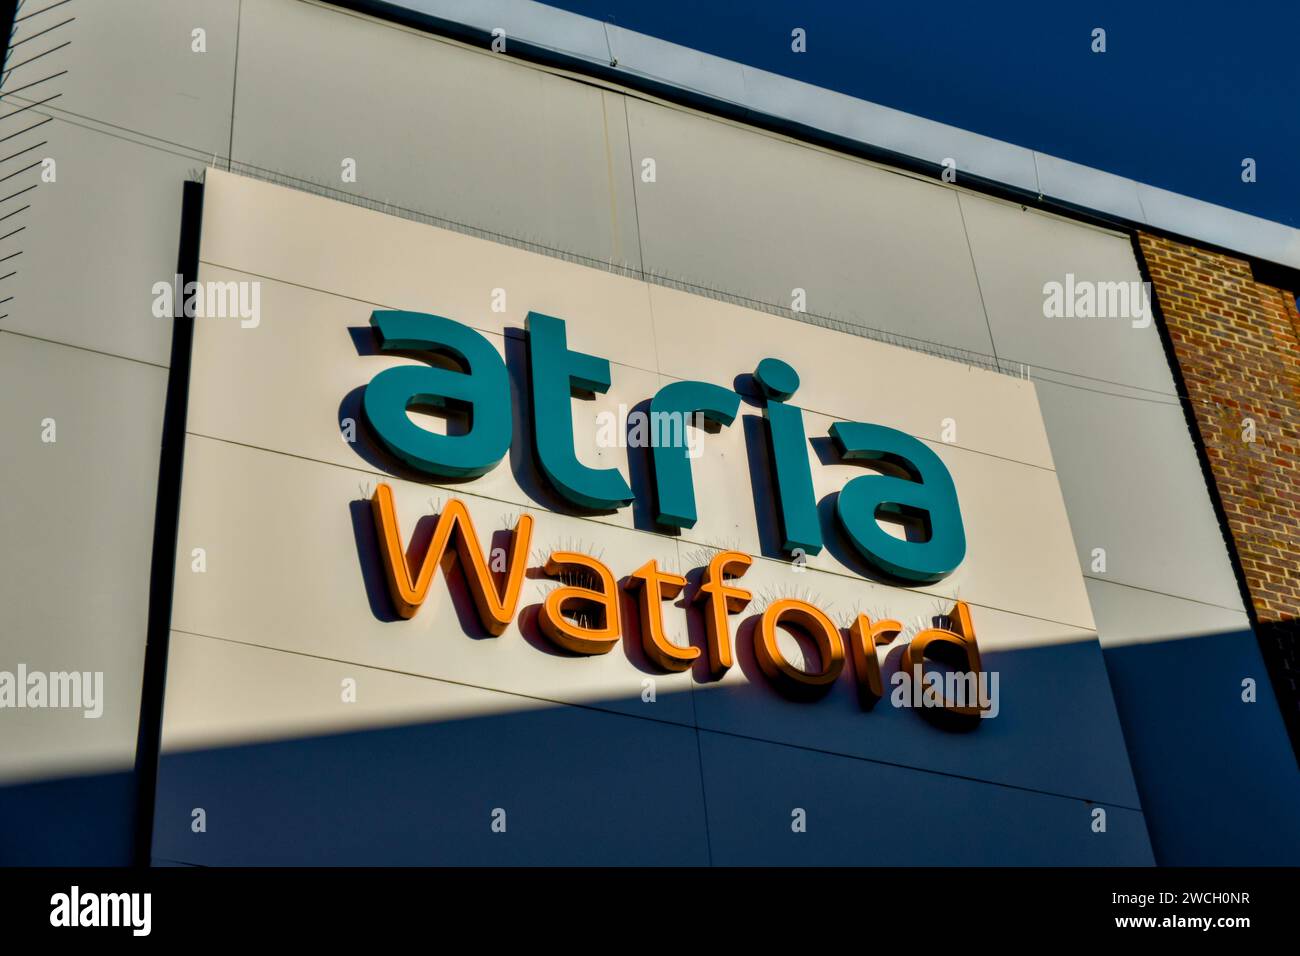 Centre commercial Atria Watford, Watford, Hertfordshire, Angleterre, Royaume-Uni Banque D'Images